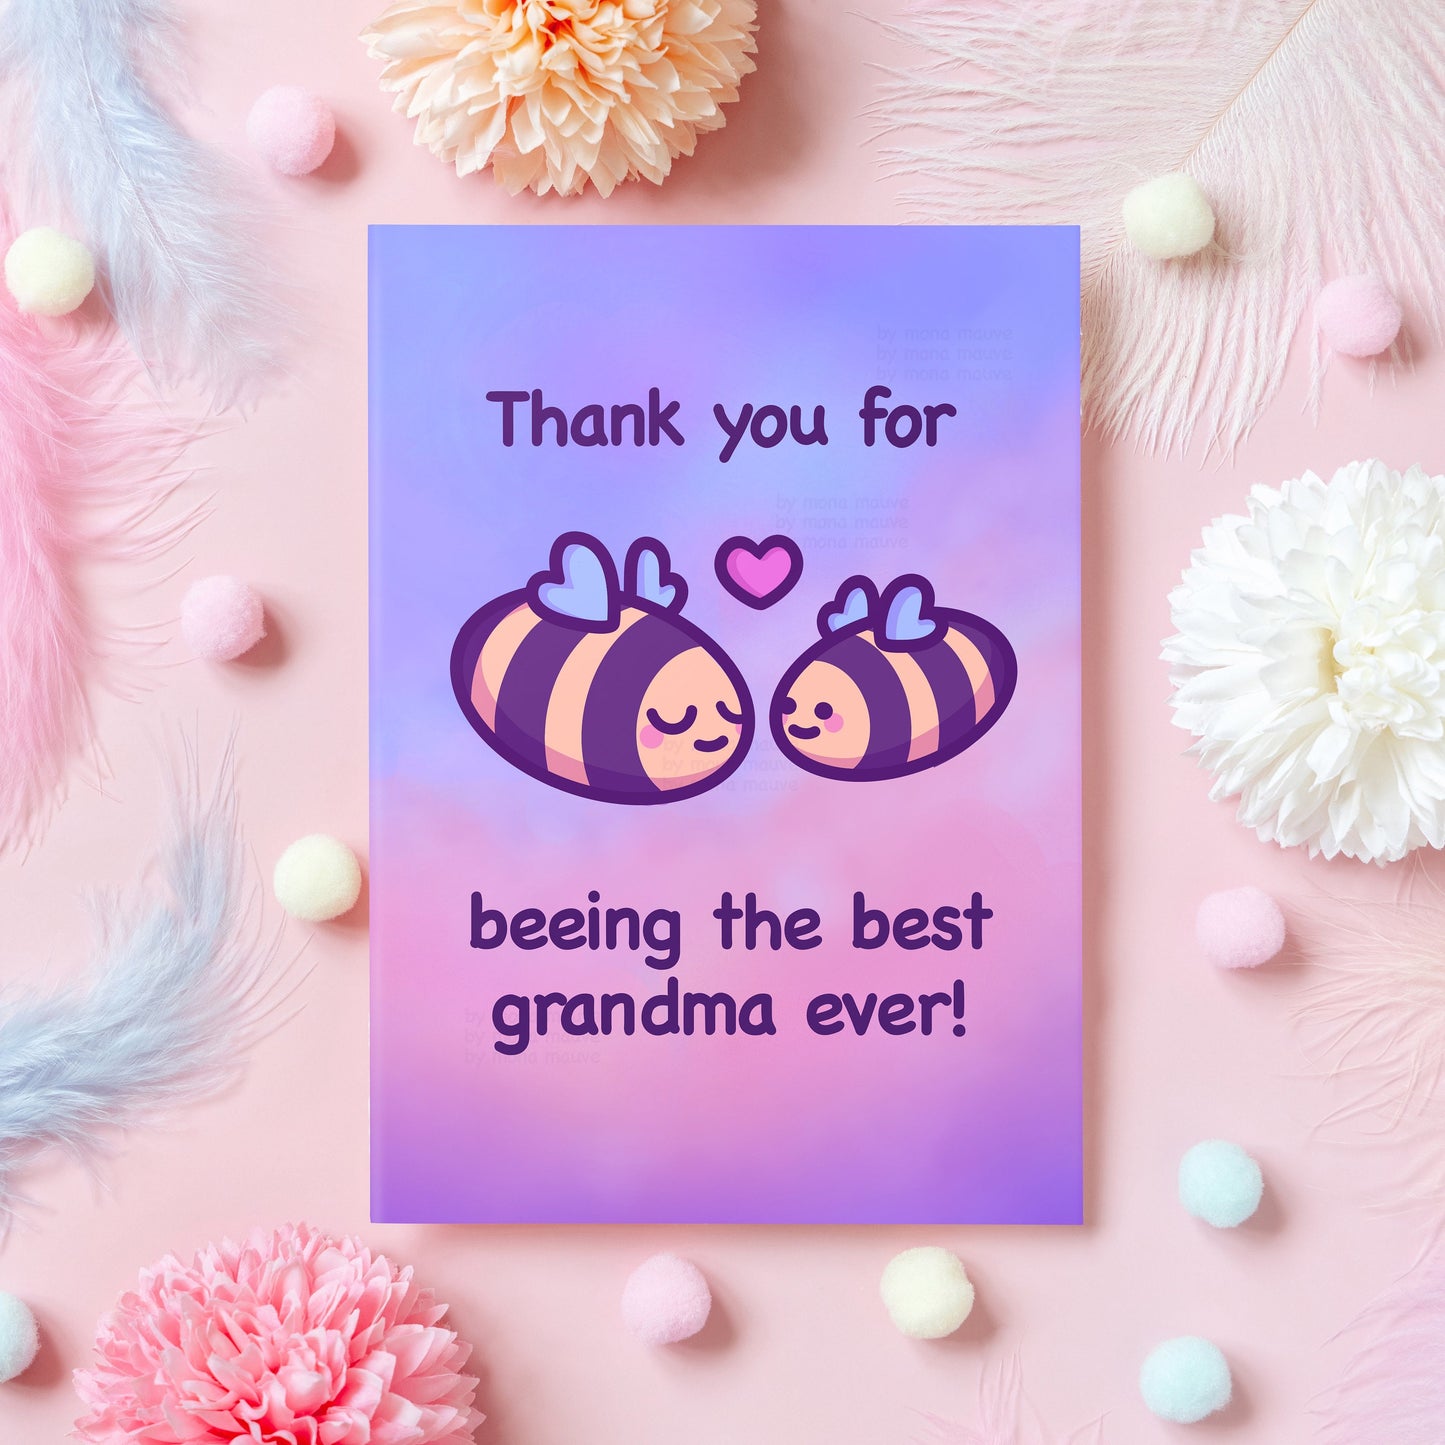 Cute Bee Card for Grandma | Thank You, Grandma! | Grandparents' Day | Wholesome & Funny Pun Card for Grandmother | Grandma's Birthday Gift